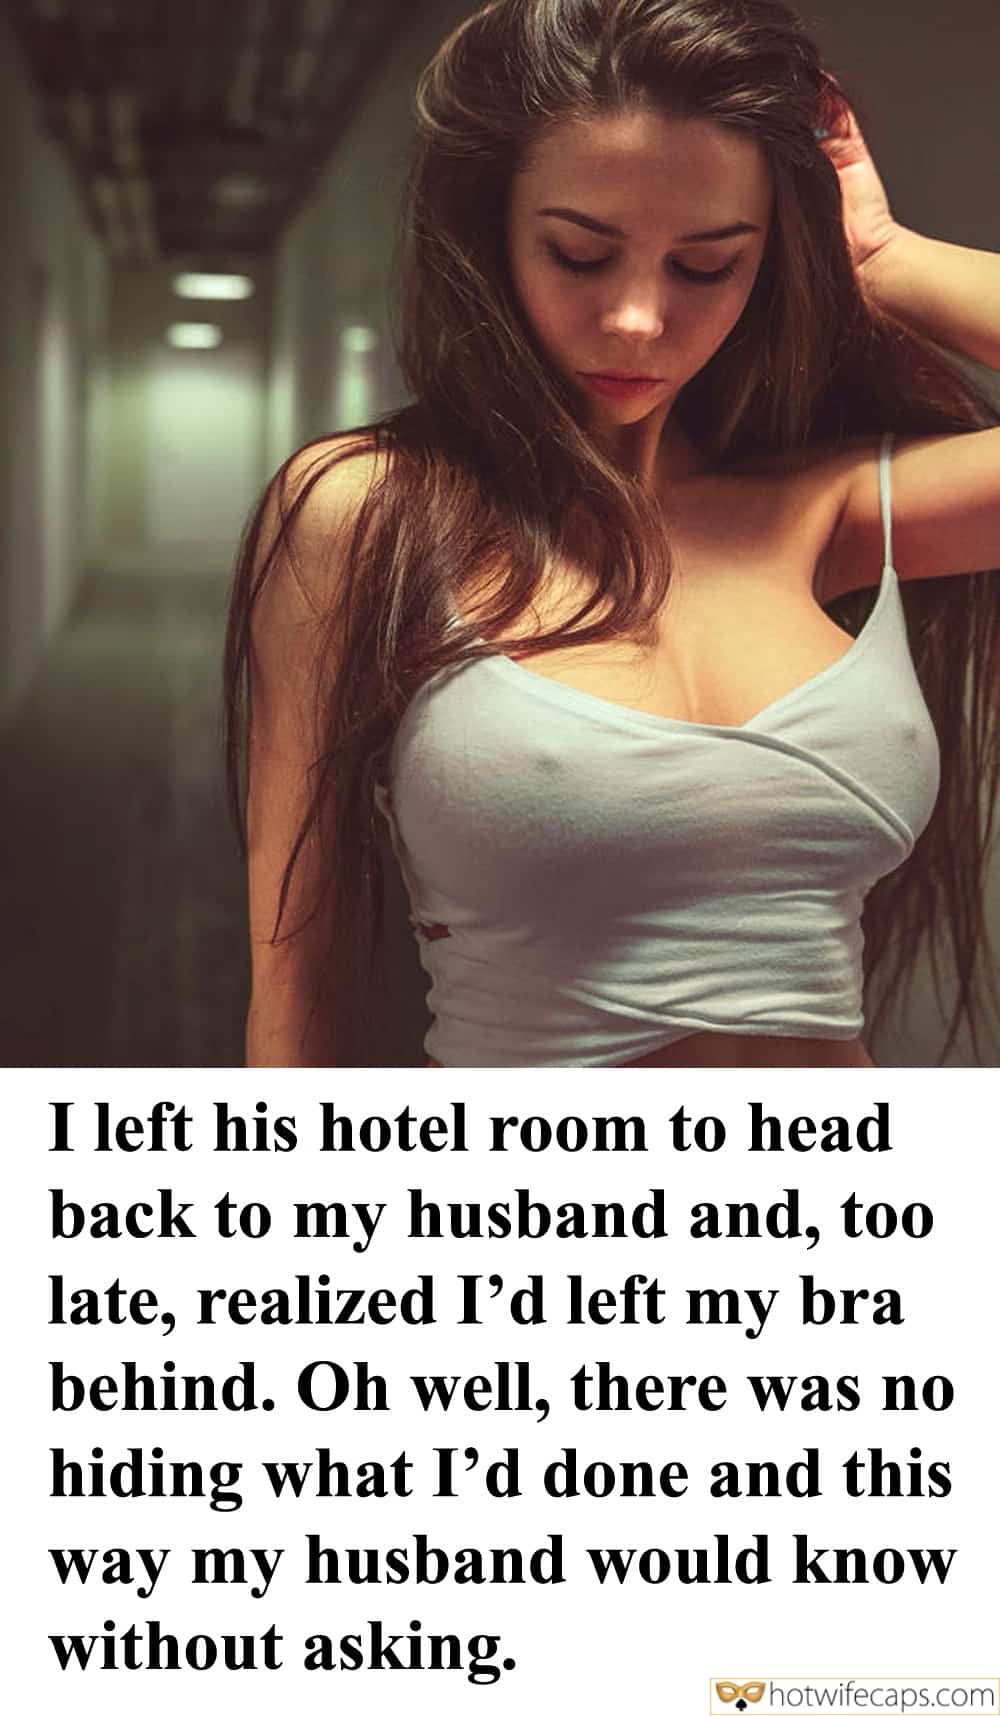 femdom hotel captions, memes and dirty quotes on HotwifeCaps Page 16 of 18